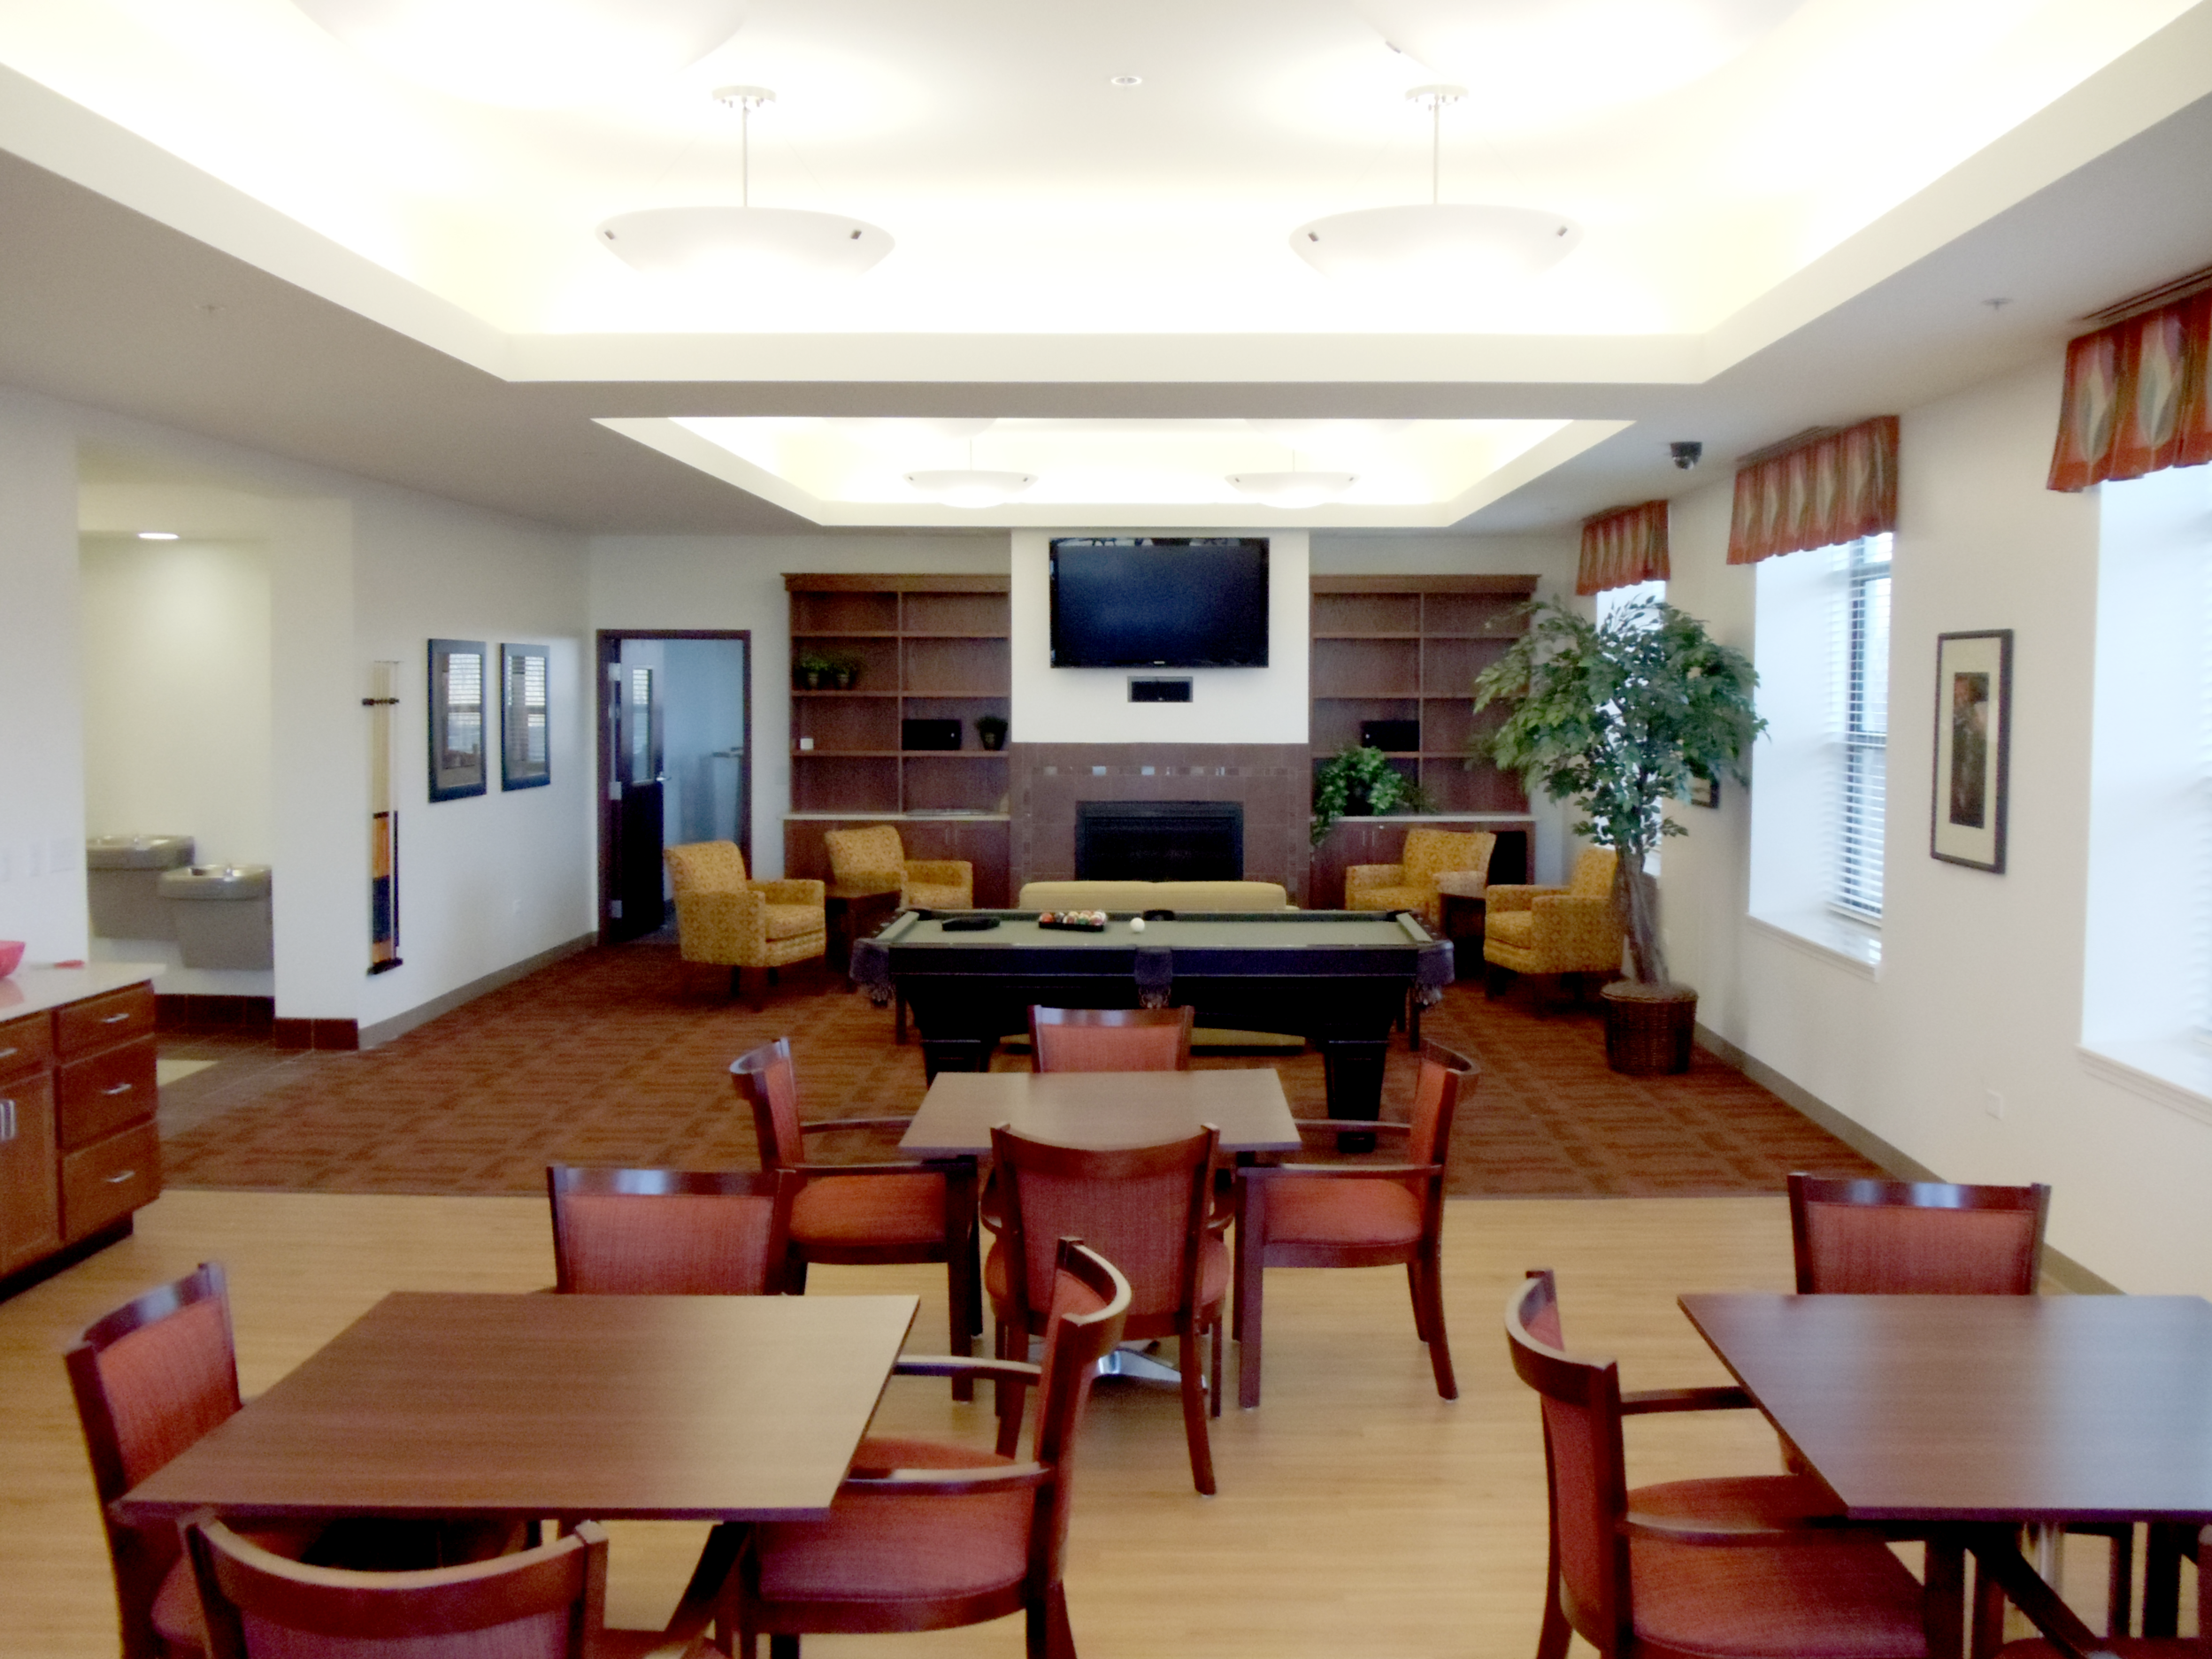 Chicago Group Housing Fountain Square Senior Living Dining Room